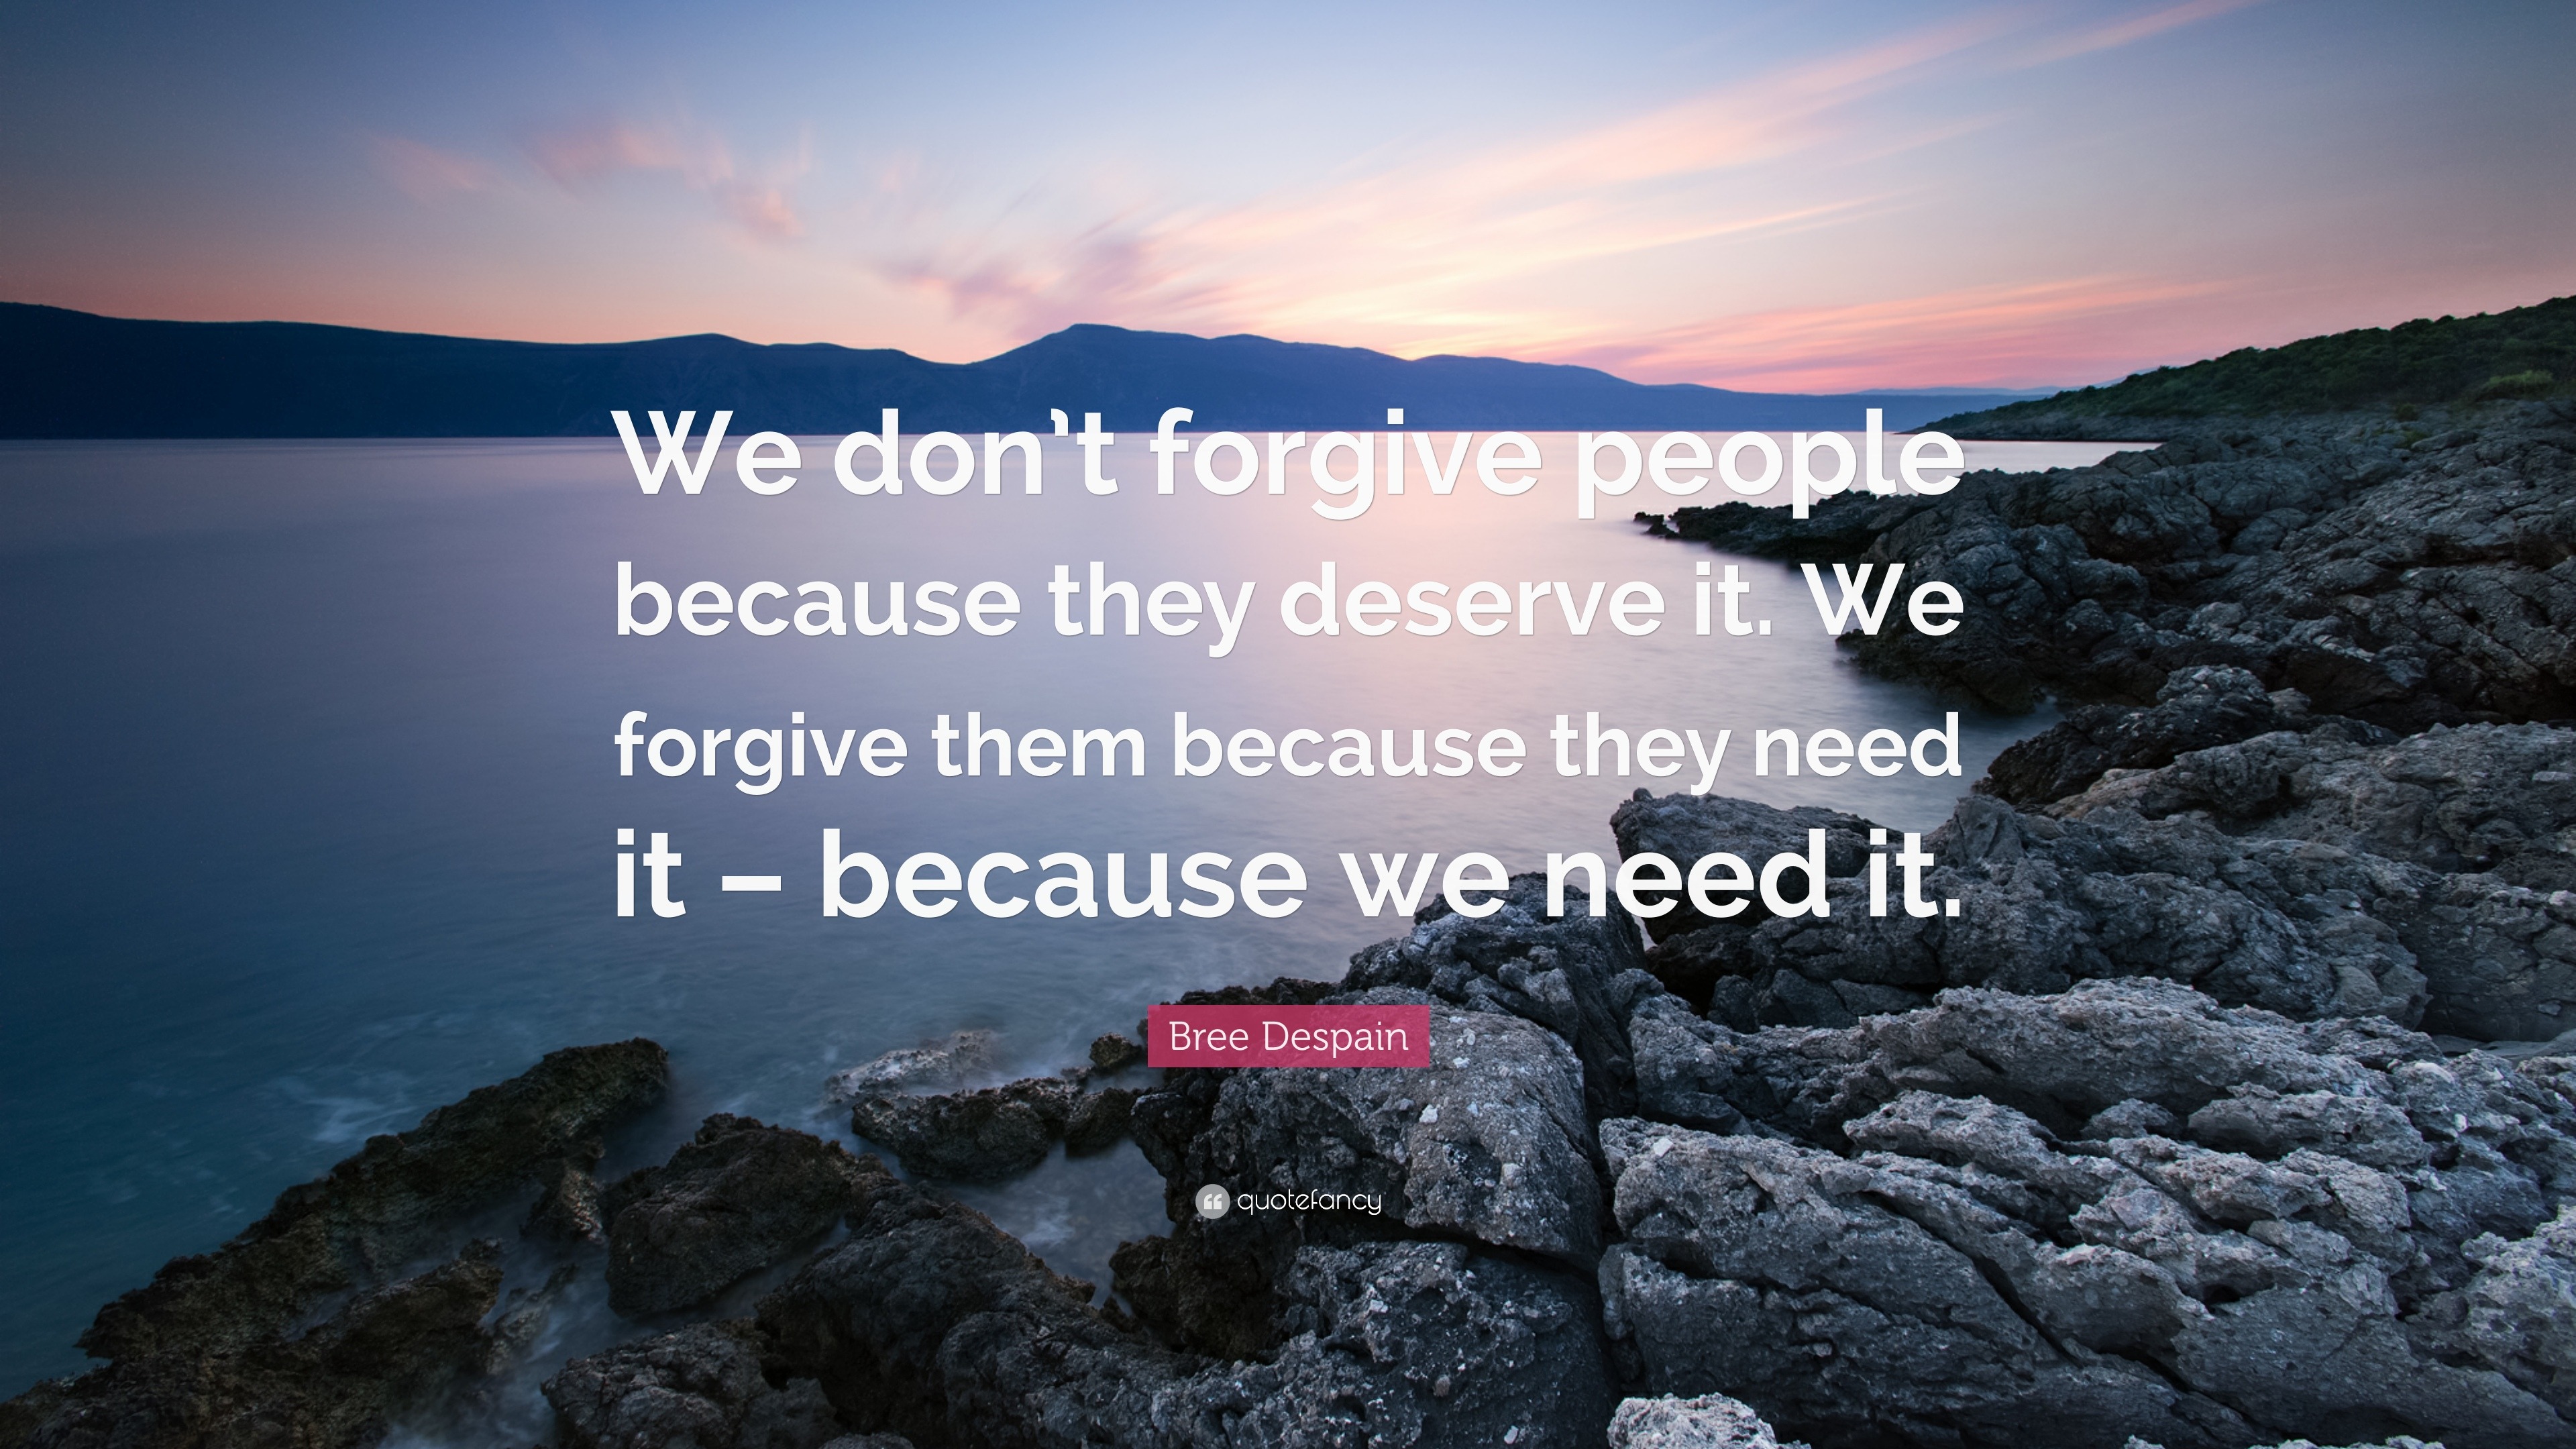 Forgive t why don people Why should